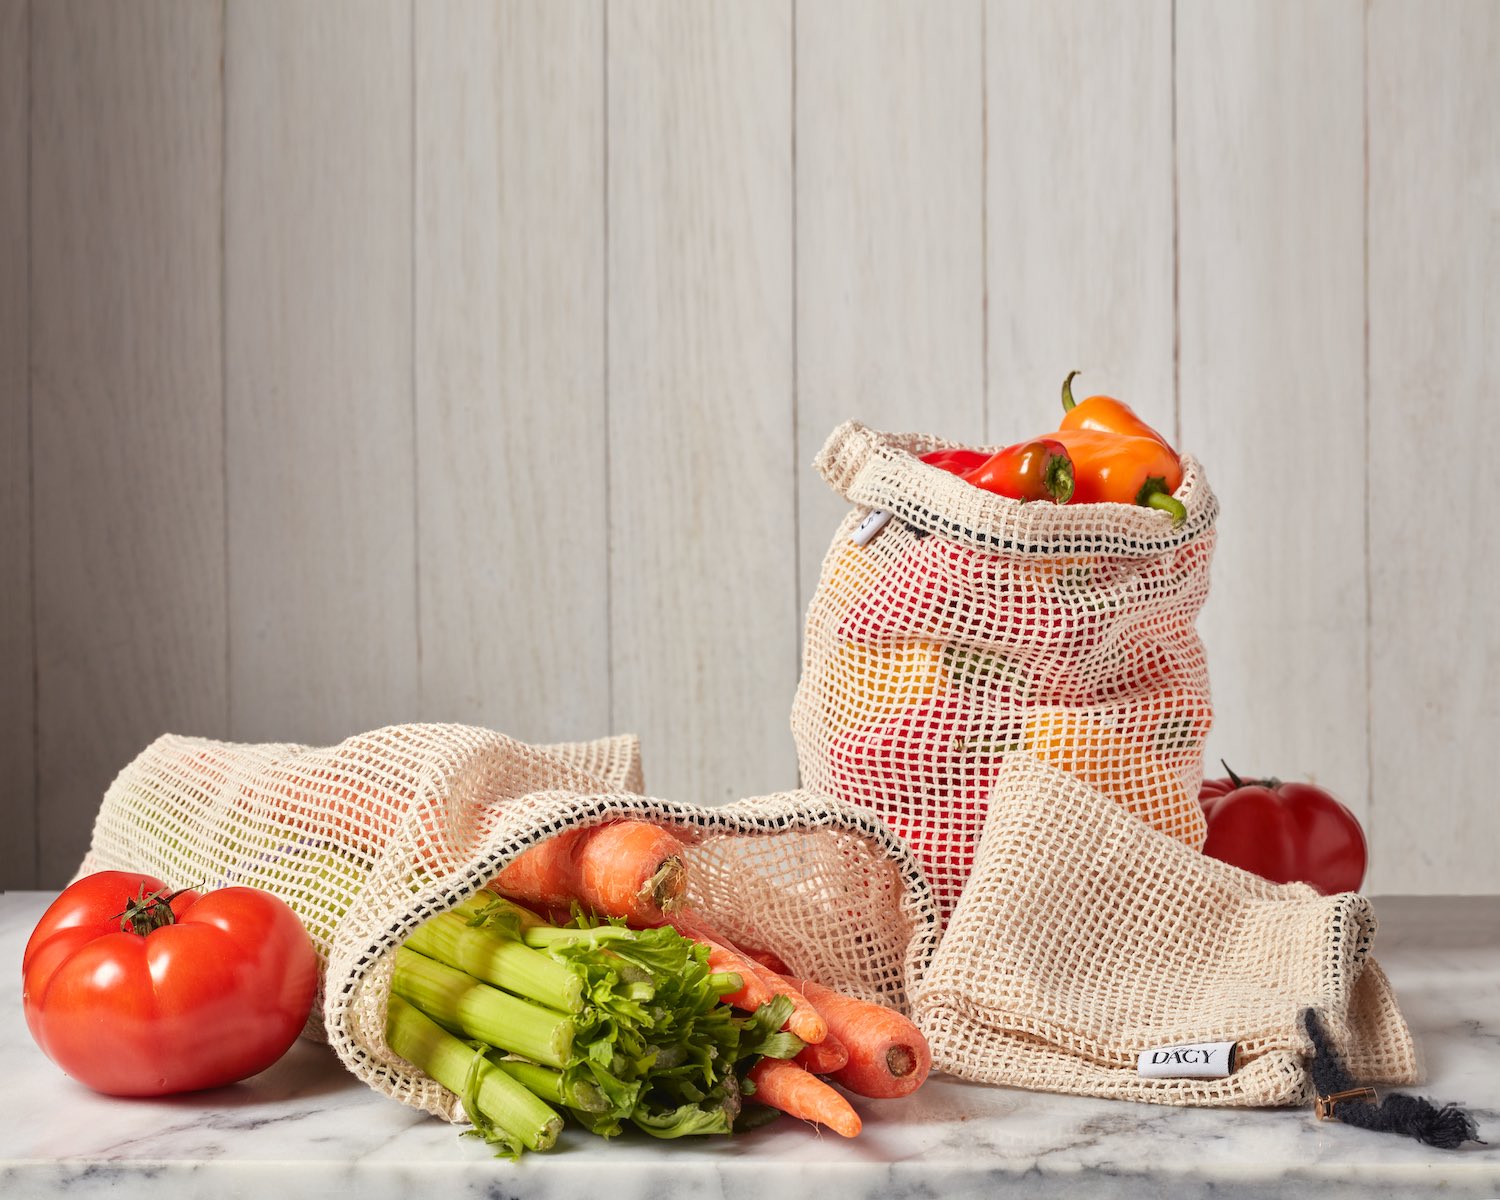 A Quick Snippet About Our Reusable Produce Bags – Purifyou